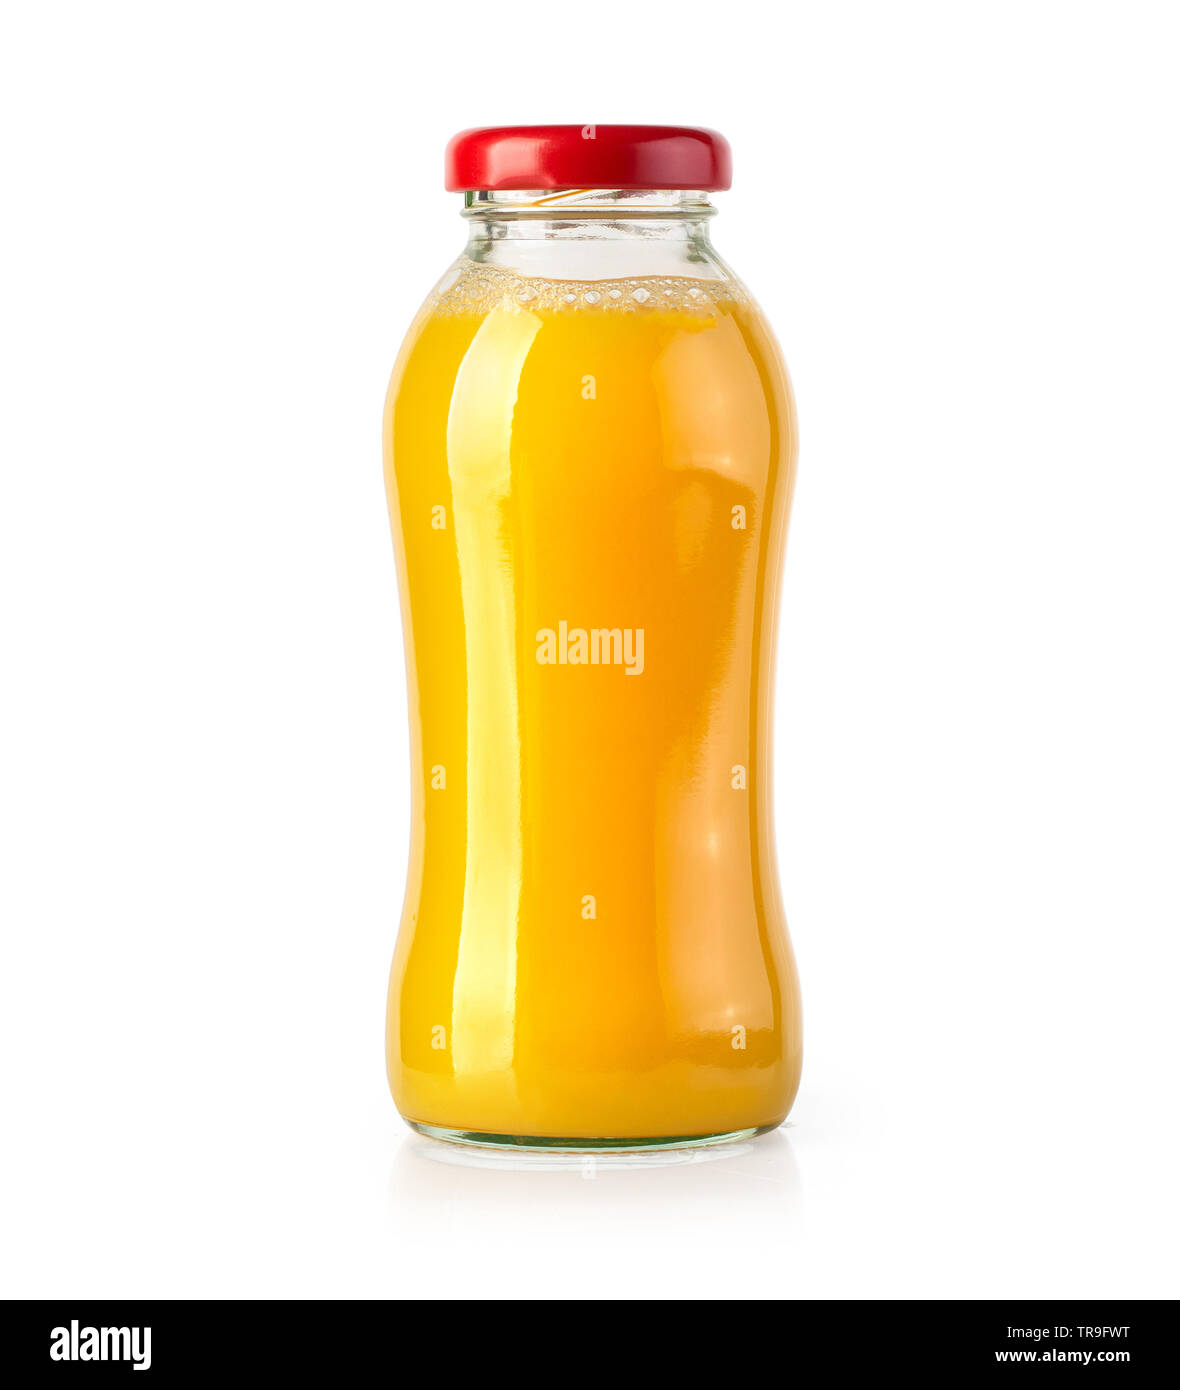 https://c8.alamy.com/comp/TR9FWT/orange-juice-bottle-isolated-on-white-background-with-clipping-path-TR9FWT.jpg